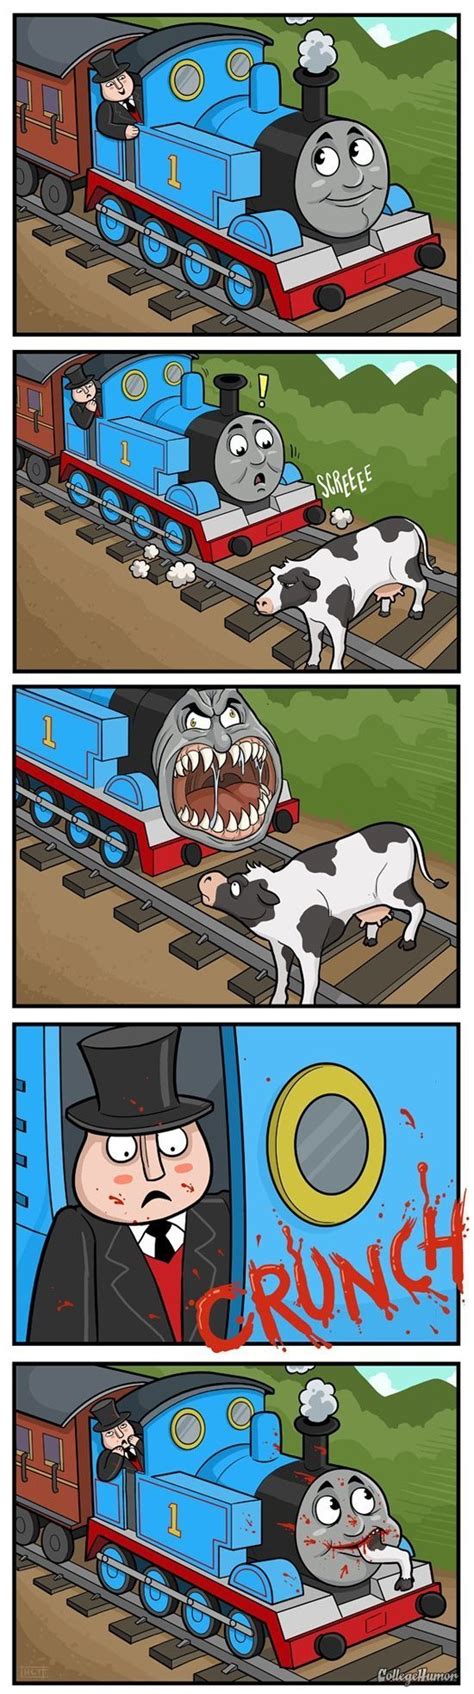 college humor funny pictures train cow cartoon